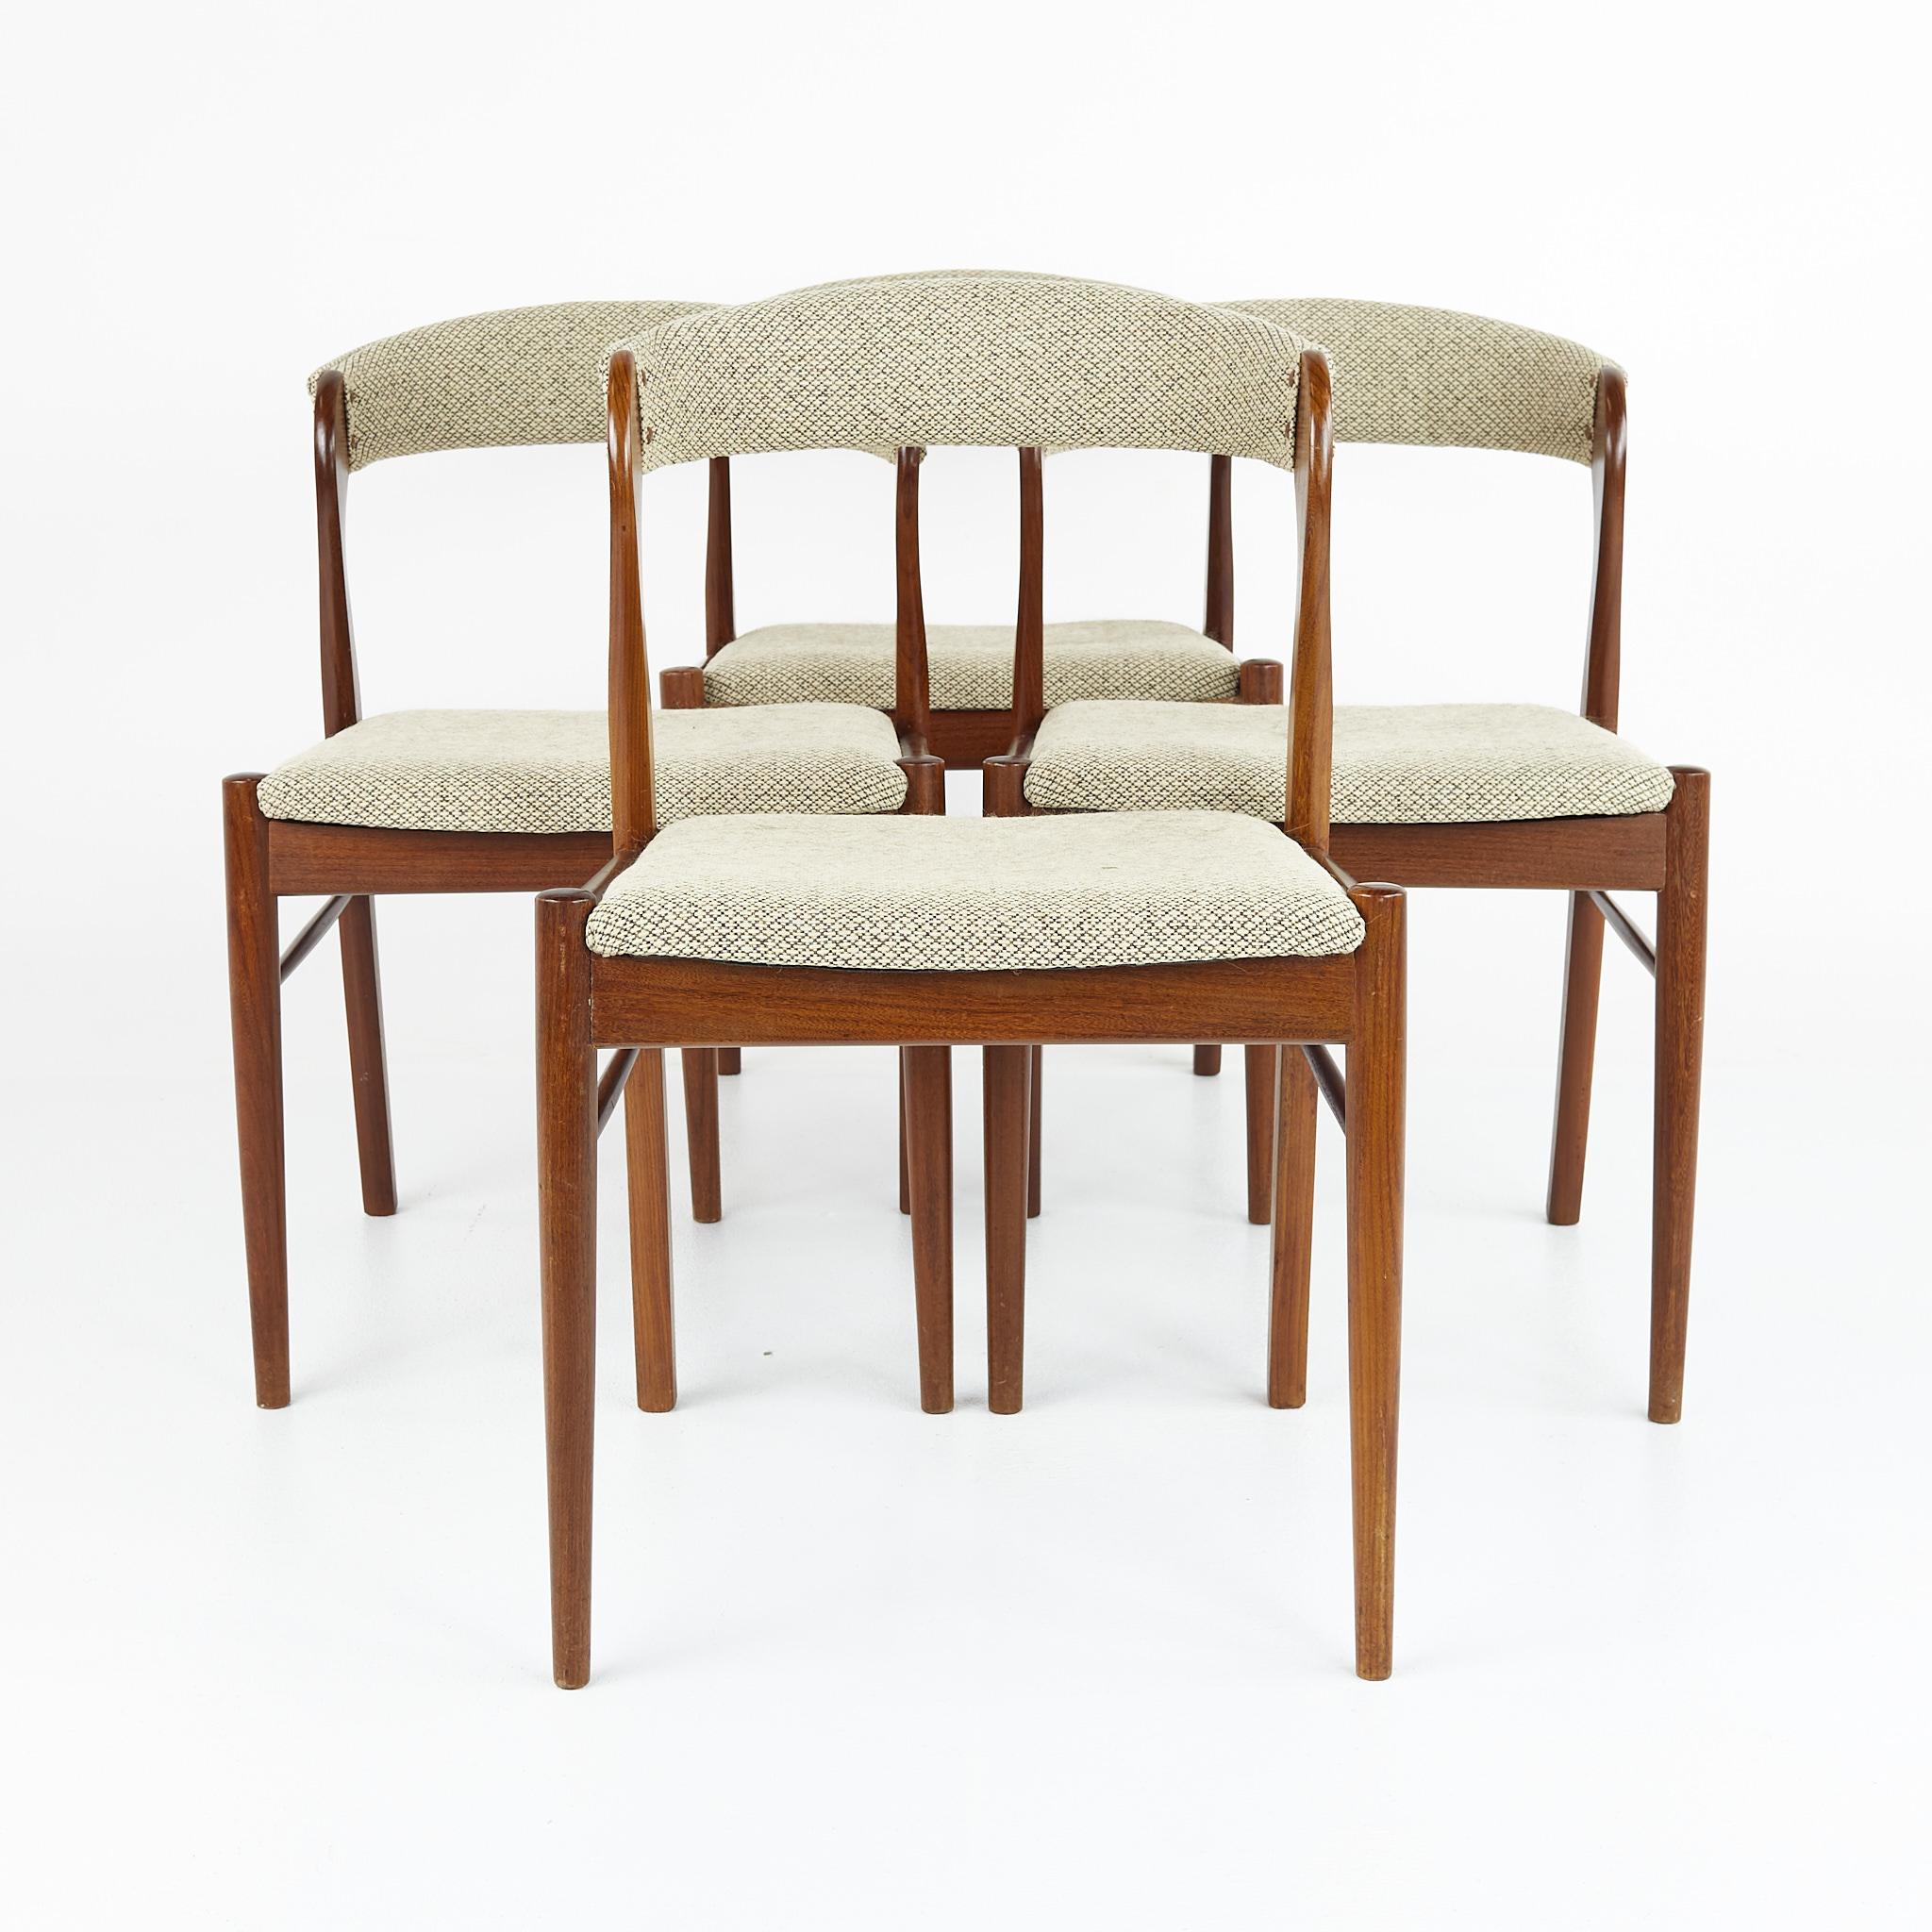 Kai Kristiansen style mid century dining chairs - Set of 4

Each chair measures: 19 wide x 16.5 deep x 30 inches high, with a seat height of 17 inches

All pieces of furniture can be had in what we call restored vintage condition. That means the